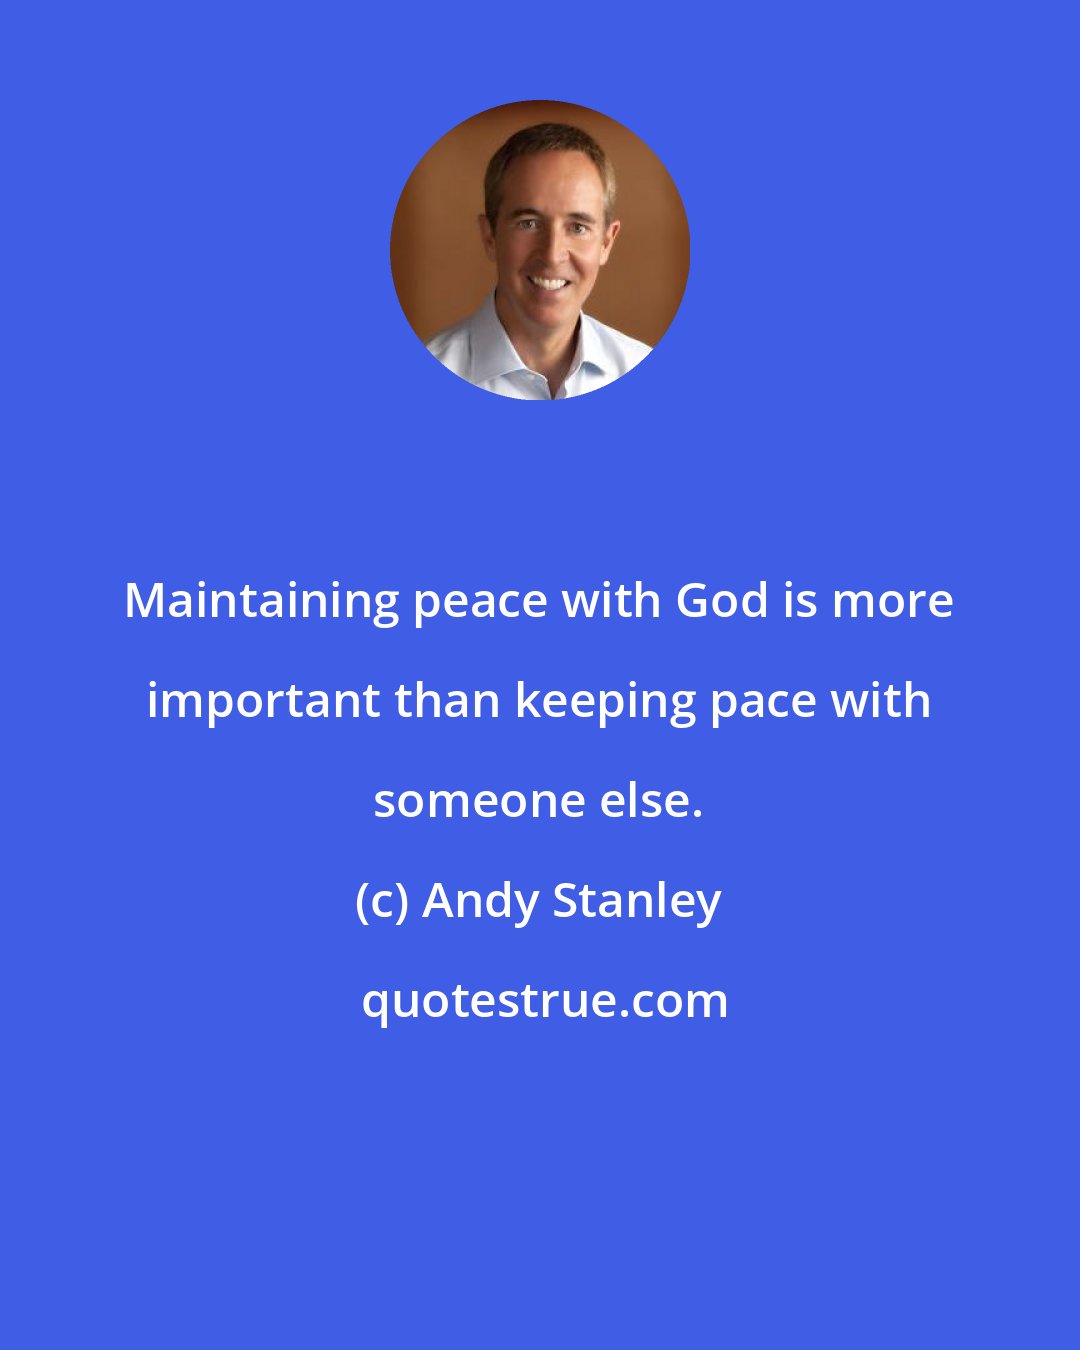 Andy Stanley: Maintaining peace with God is more important than keeping pace with someone else.